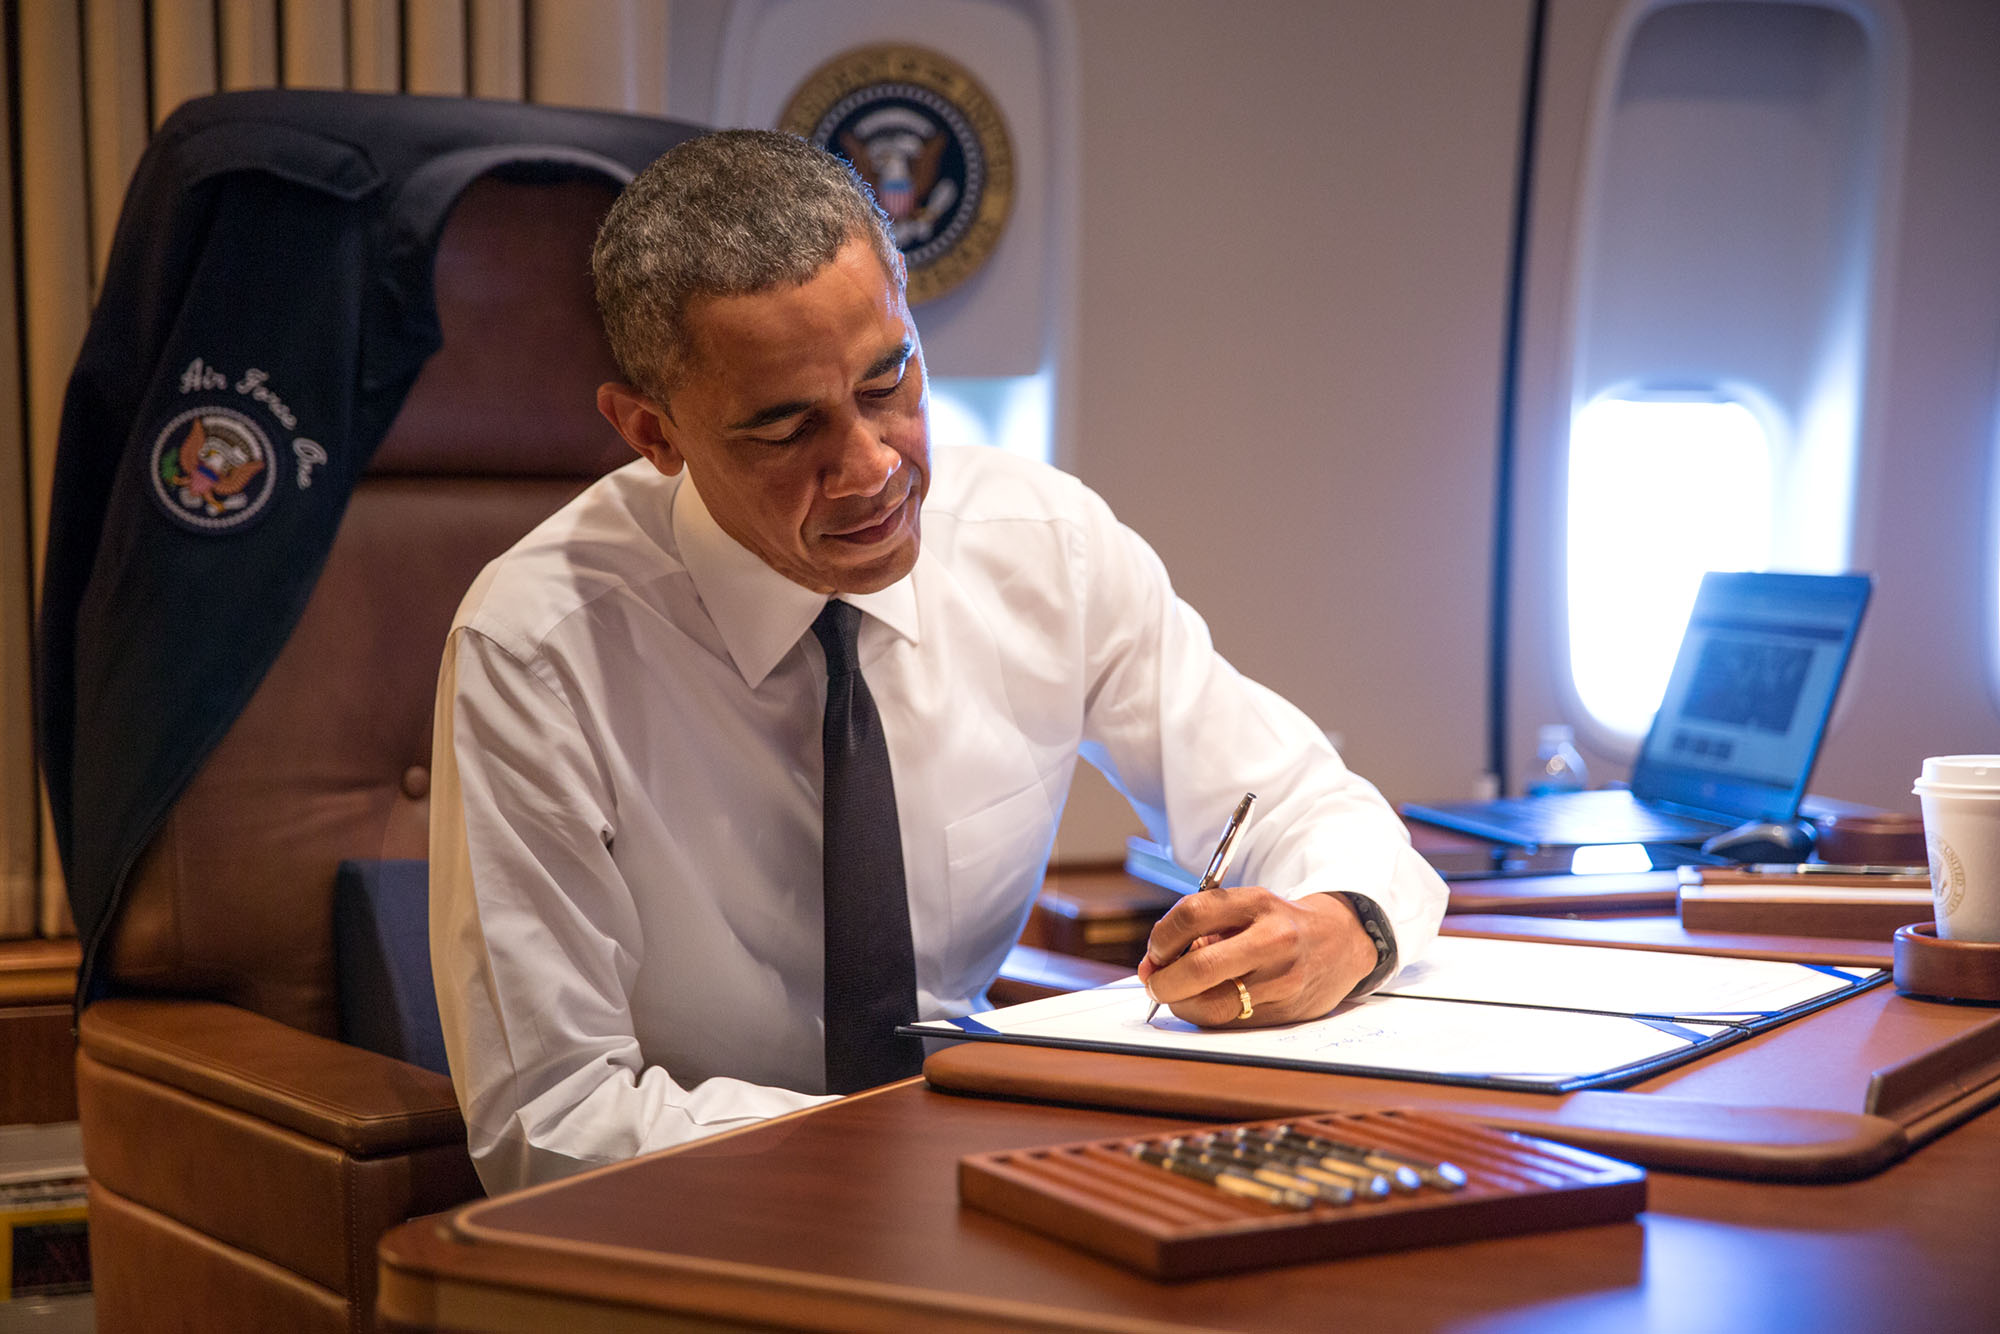 Aboard Air Force One en route to Alabama, President Obama signs H.R. 432 authorizing the Congressional Gold Medal to the 